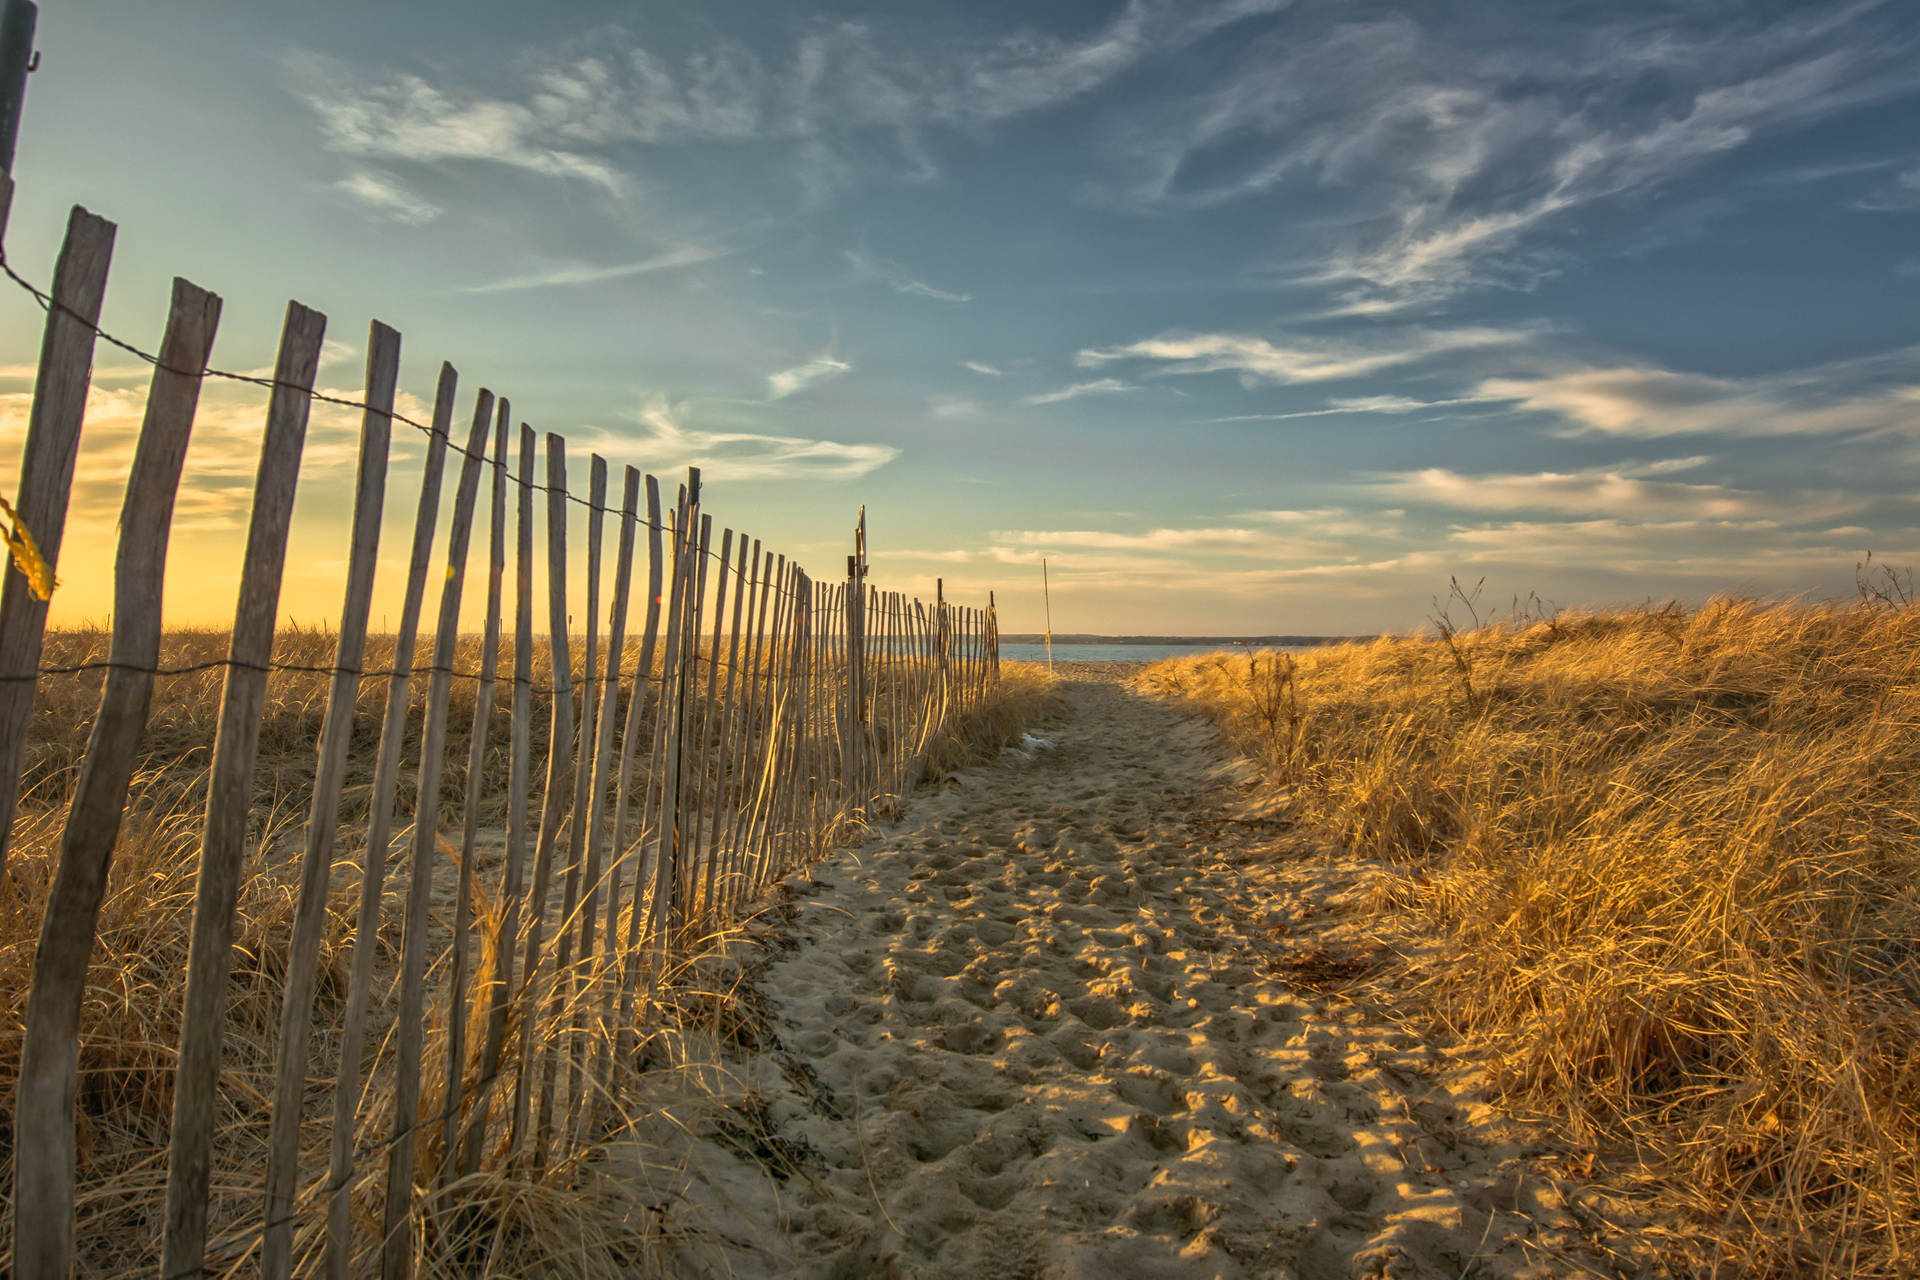 Fences And Sand In Rhode Island's Beach Wallpaper